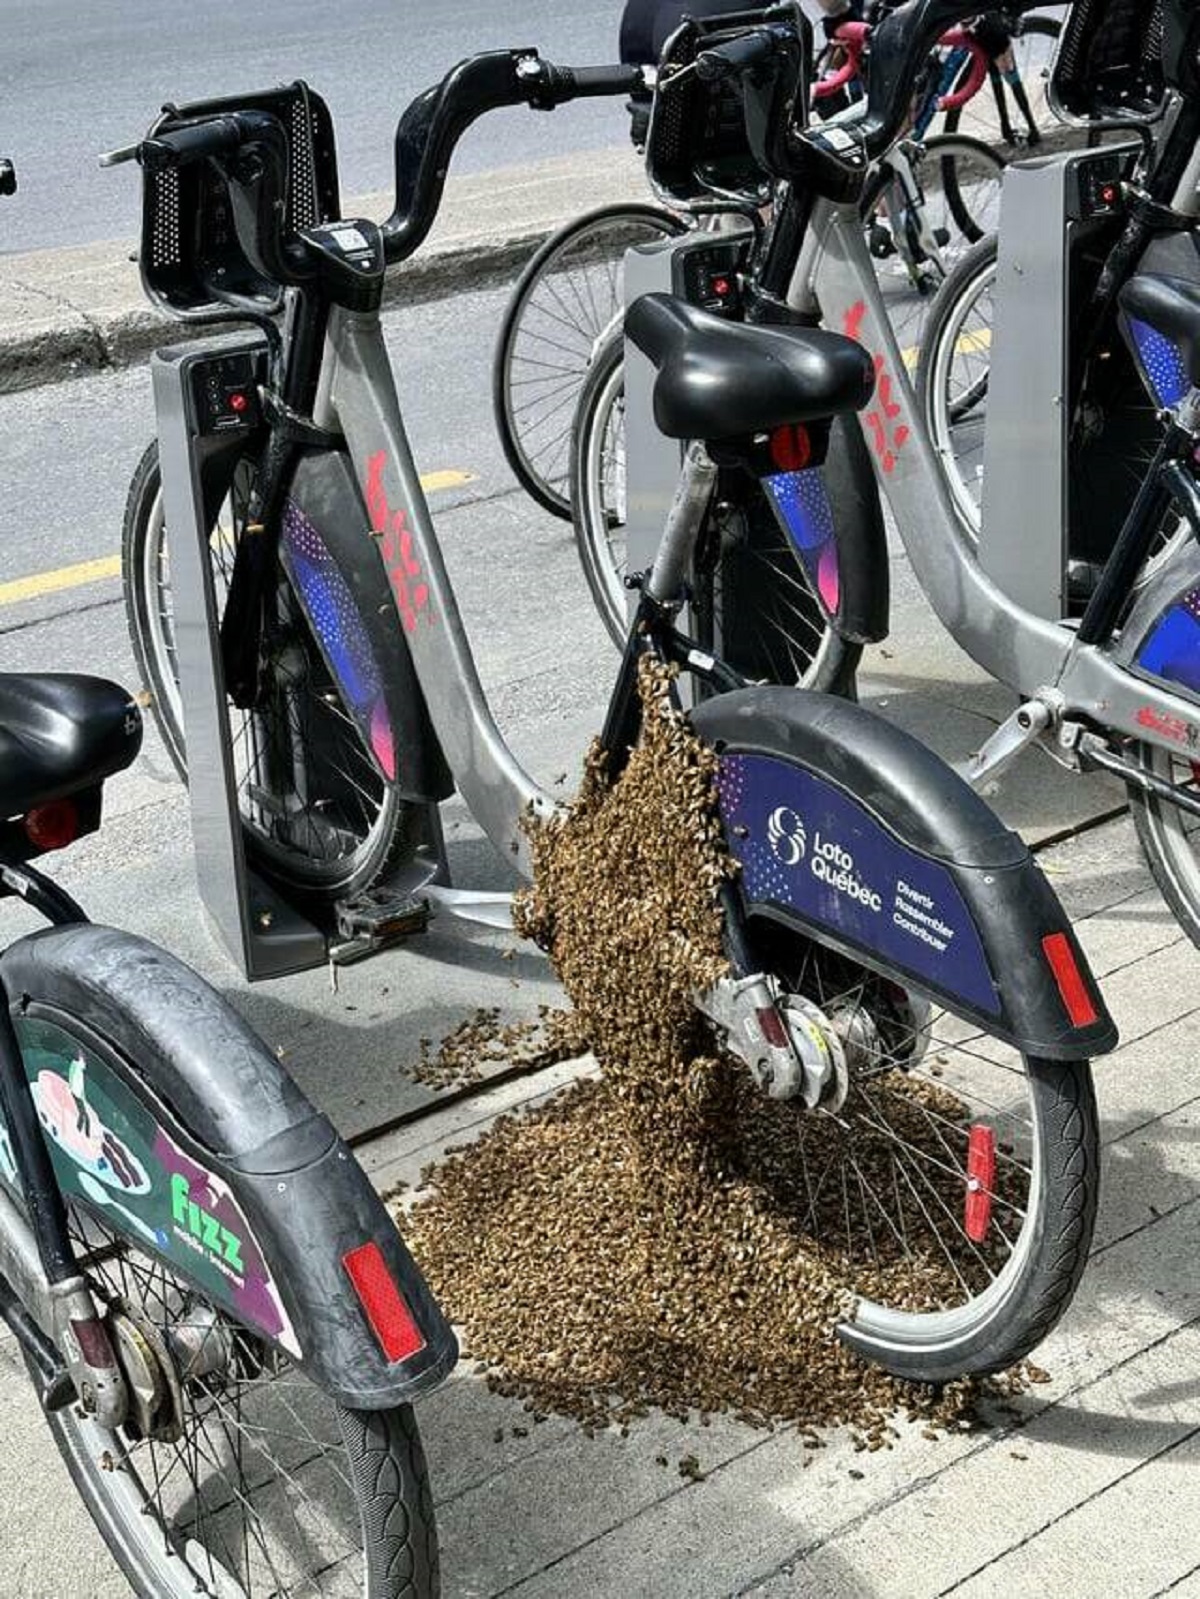 "A swarm of bees have formed on a BIXI bike in Montreal"